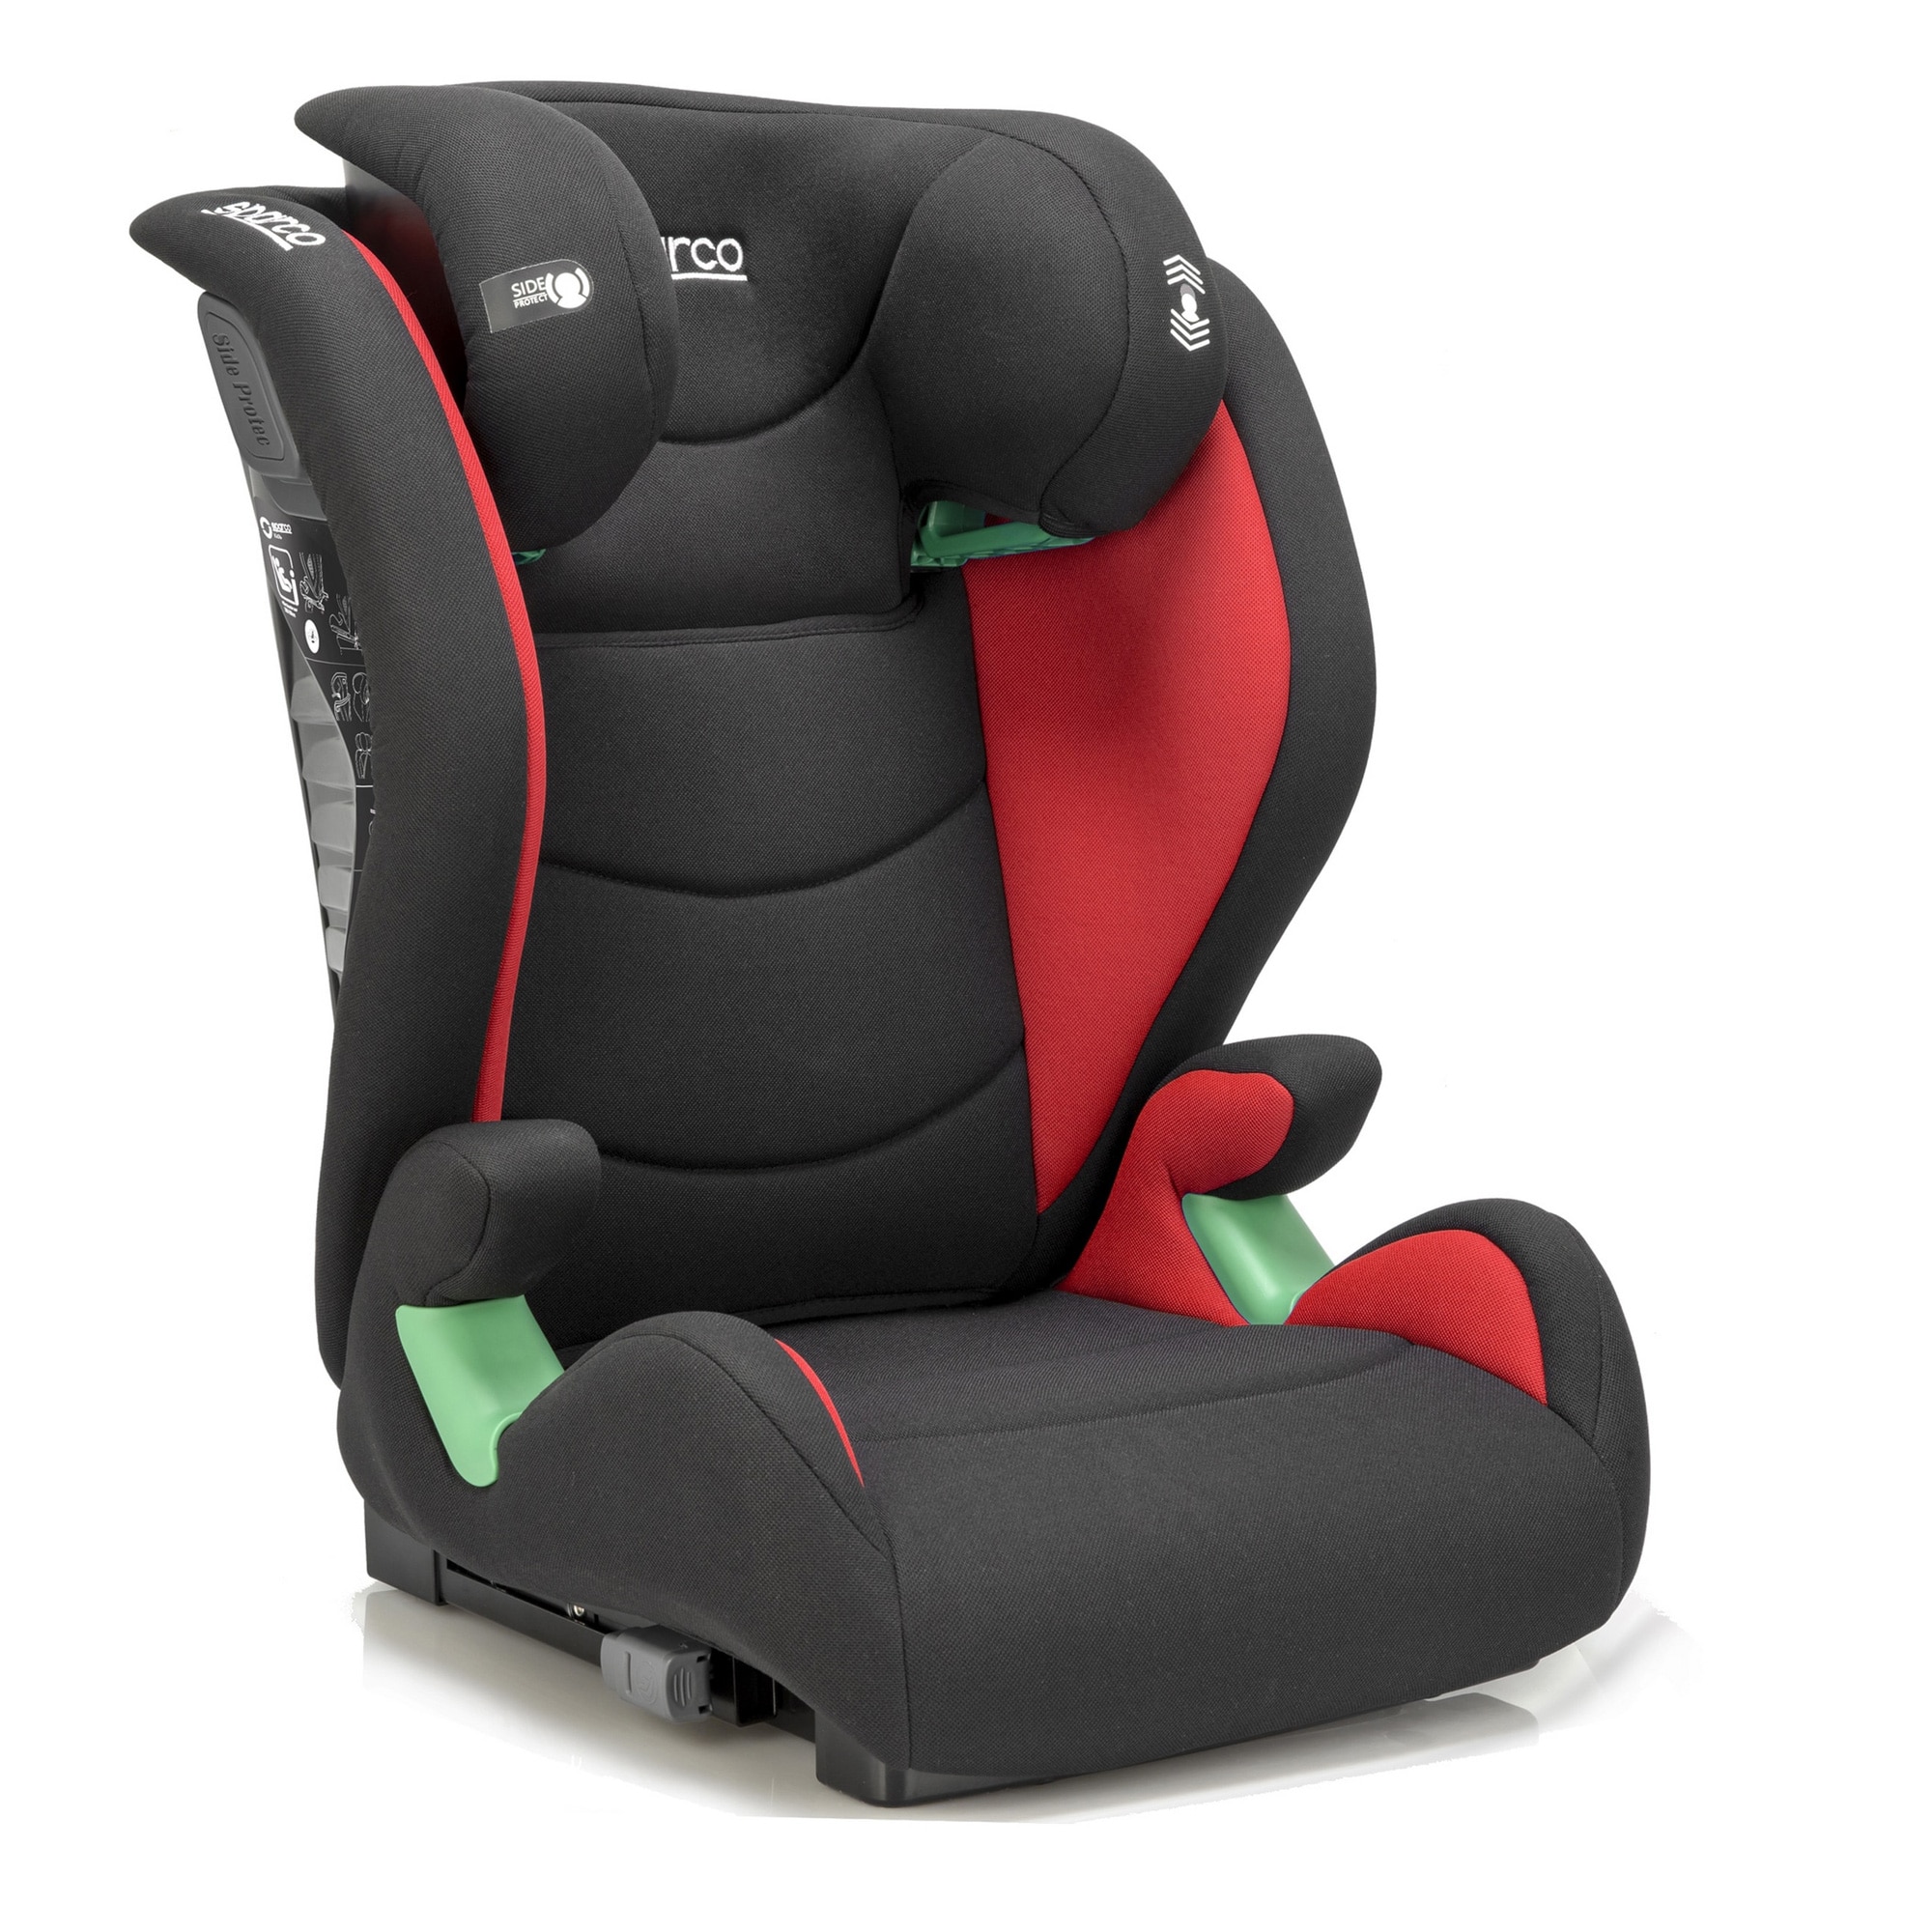 Child Safety Seat Sparco SK2000I Red